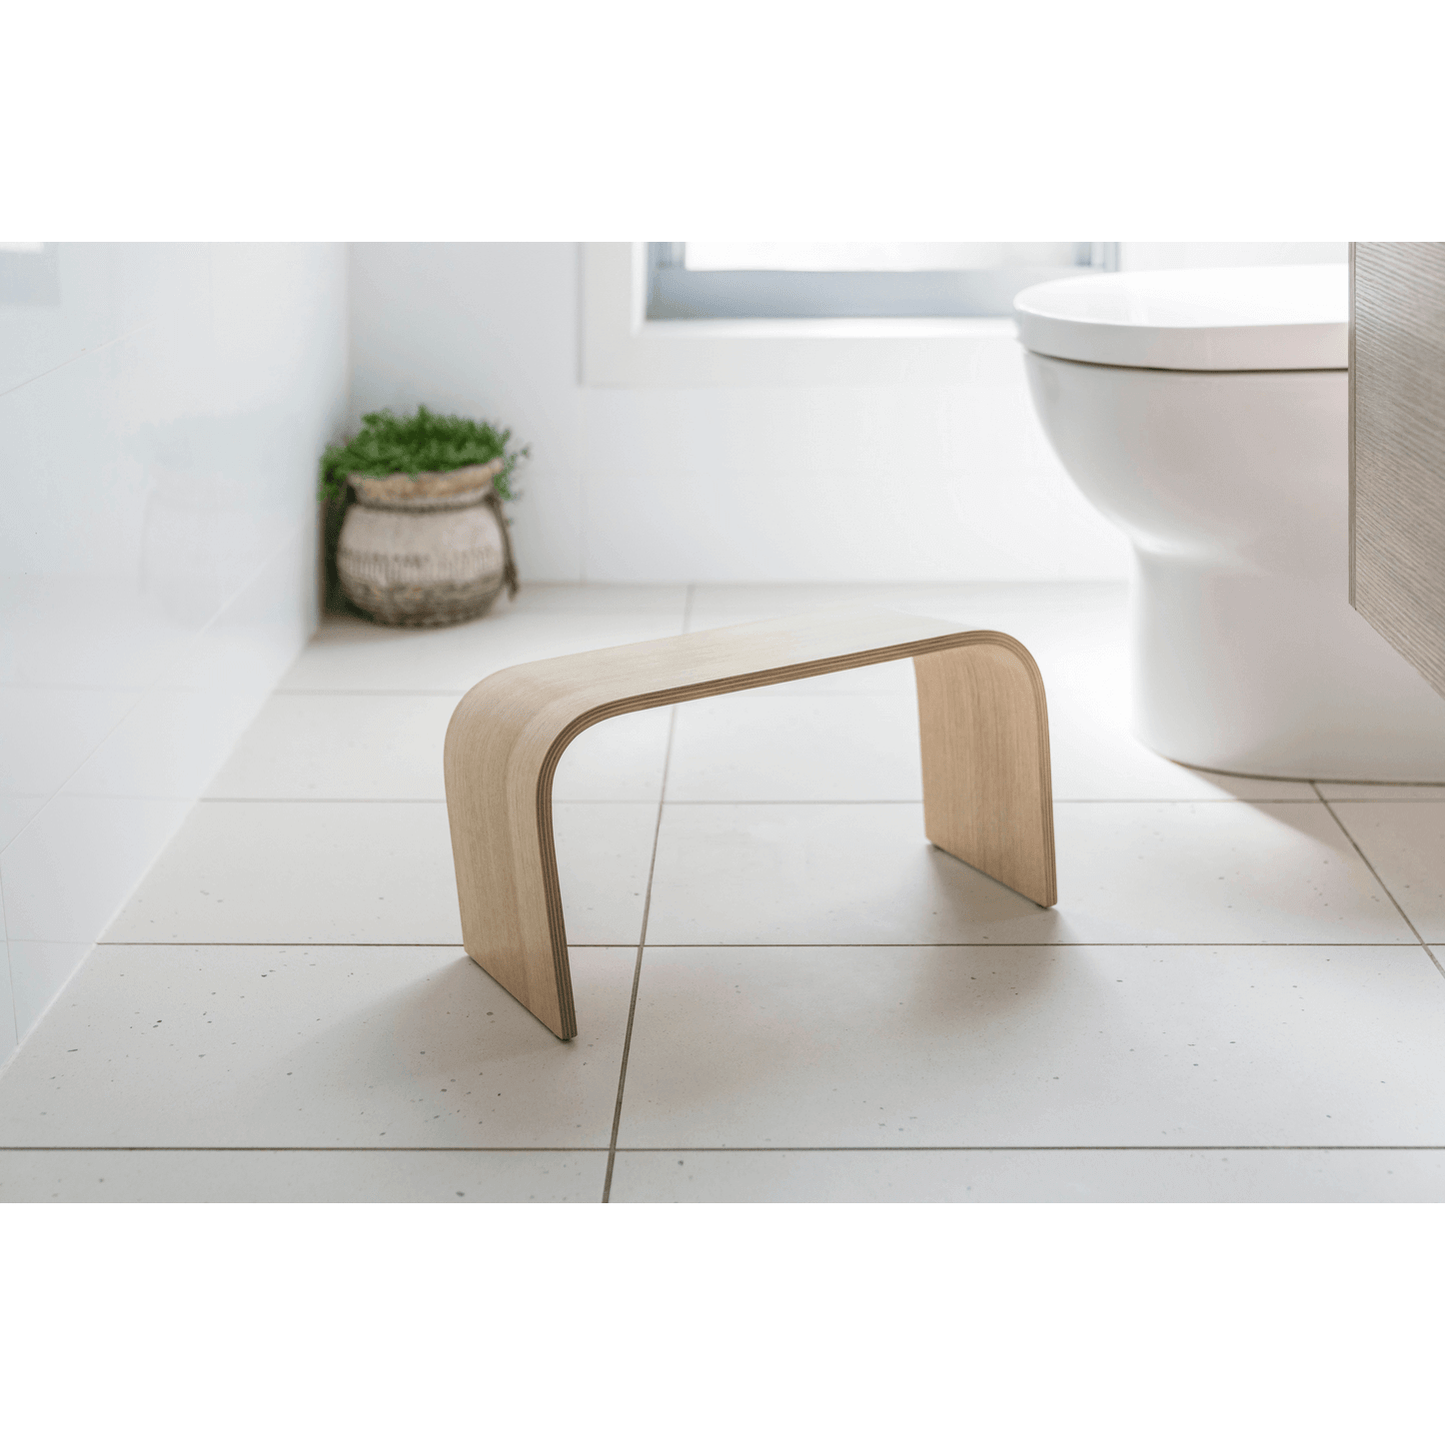 The PROPPR Timber - Tasmanian Oak Toilet Foot Stool - front view in a bathroom